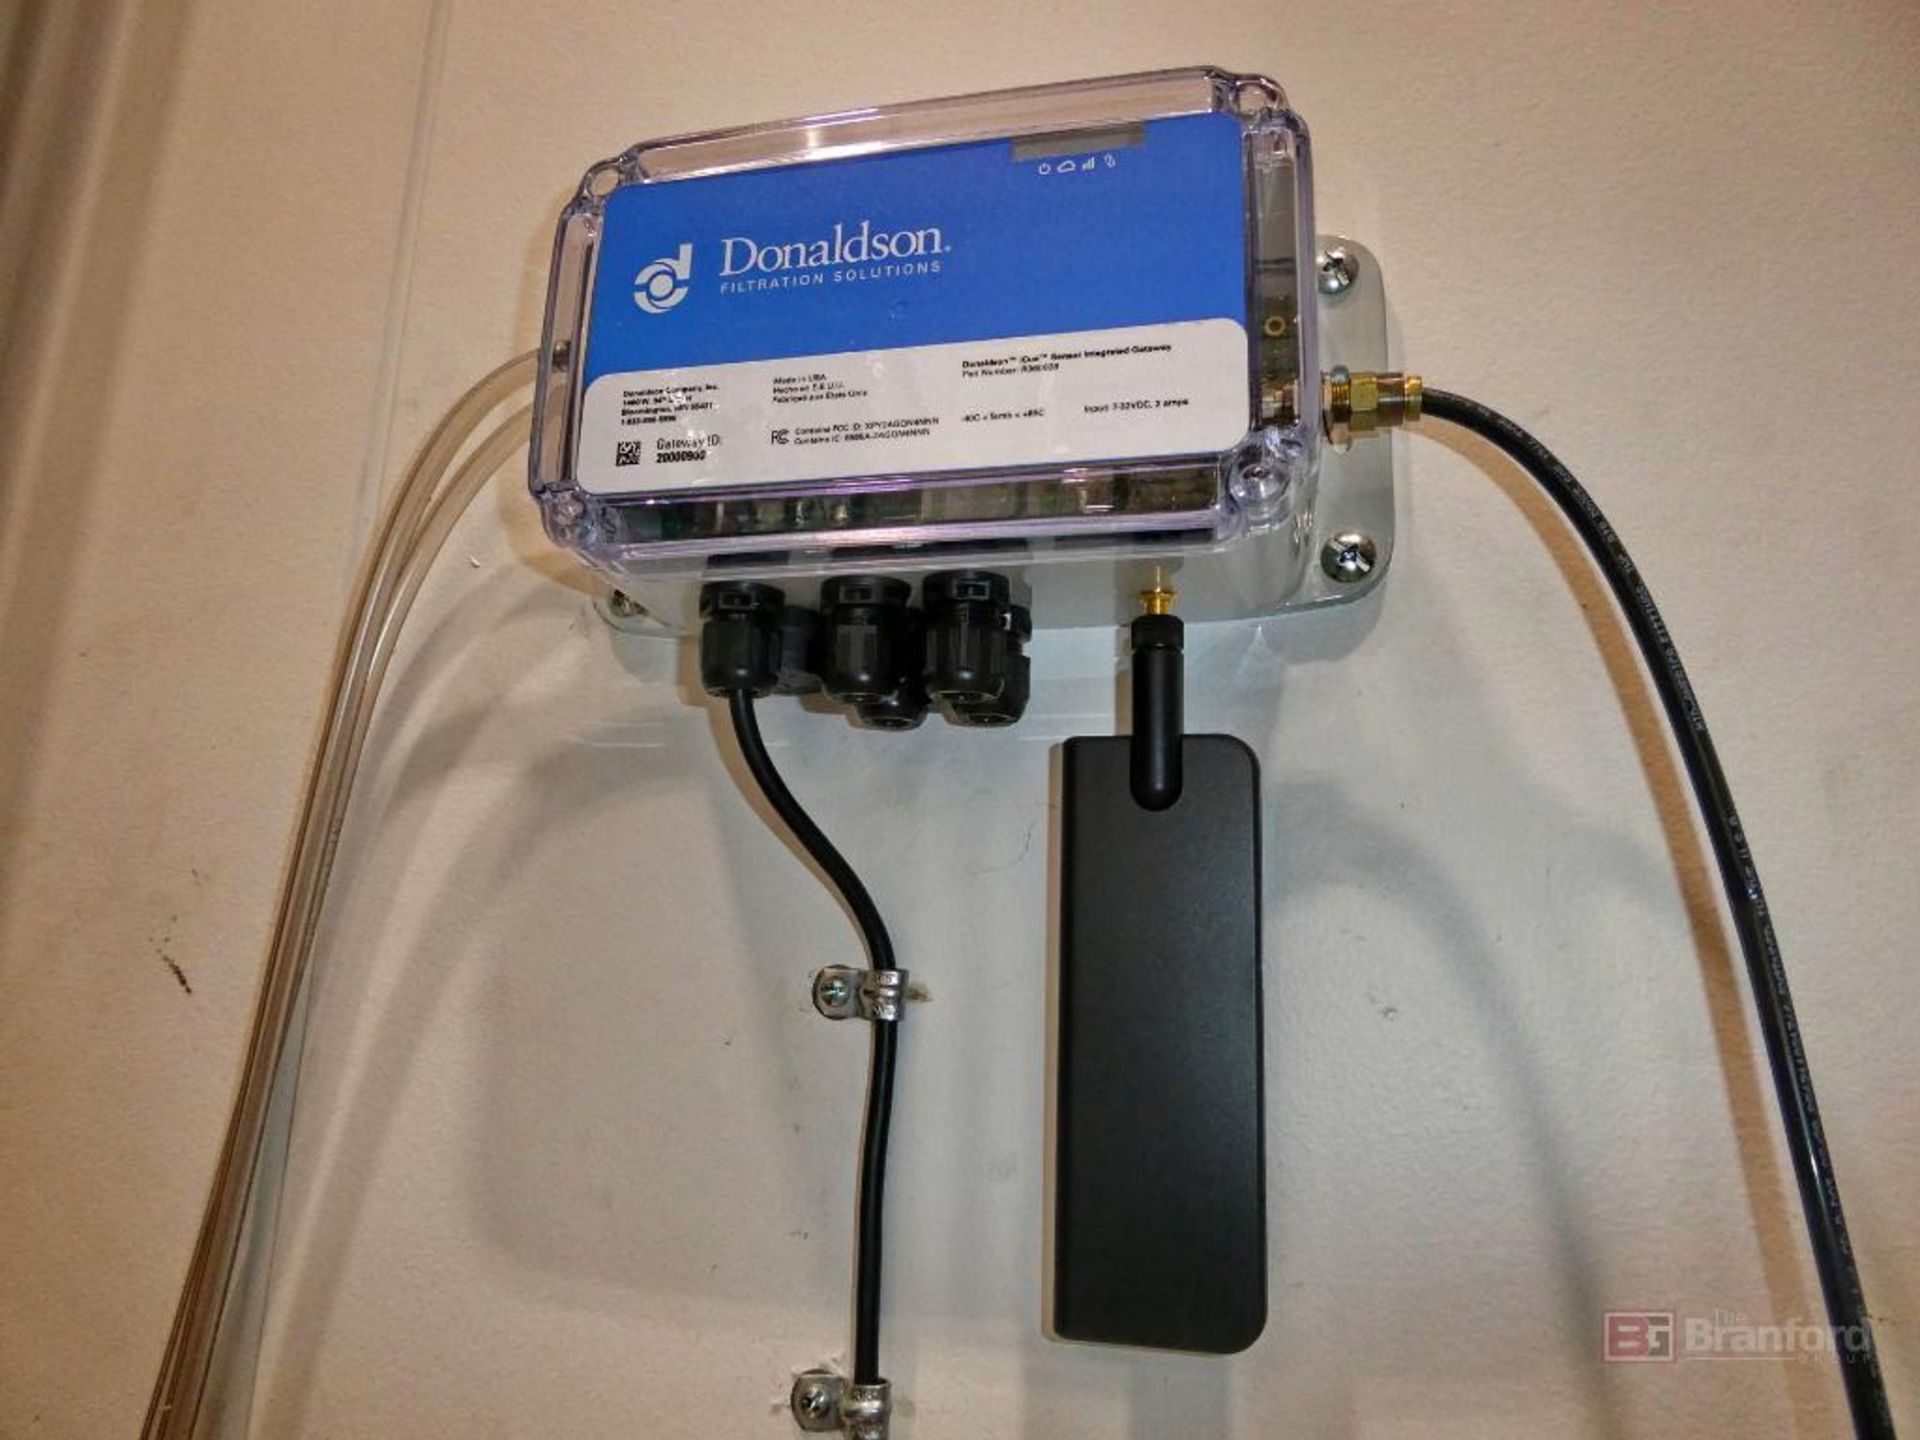 Donaldson-Torit Model DFE4-32, Downflo Evolution 32 Cartridge Dust Collection System - Image 10 of 11